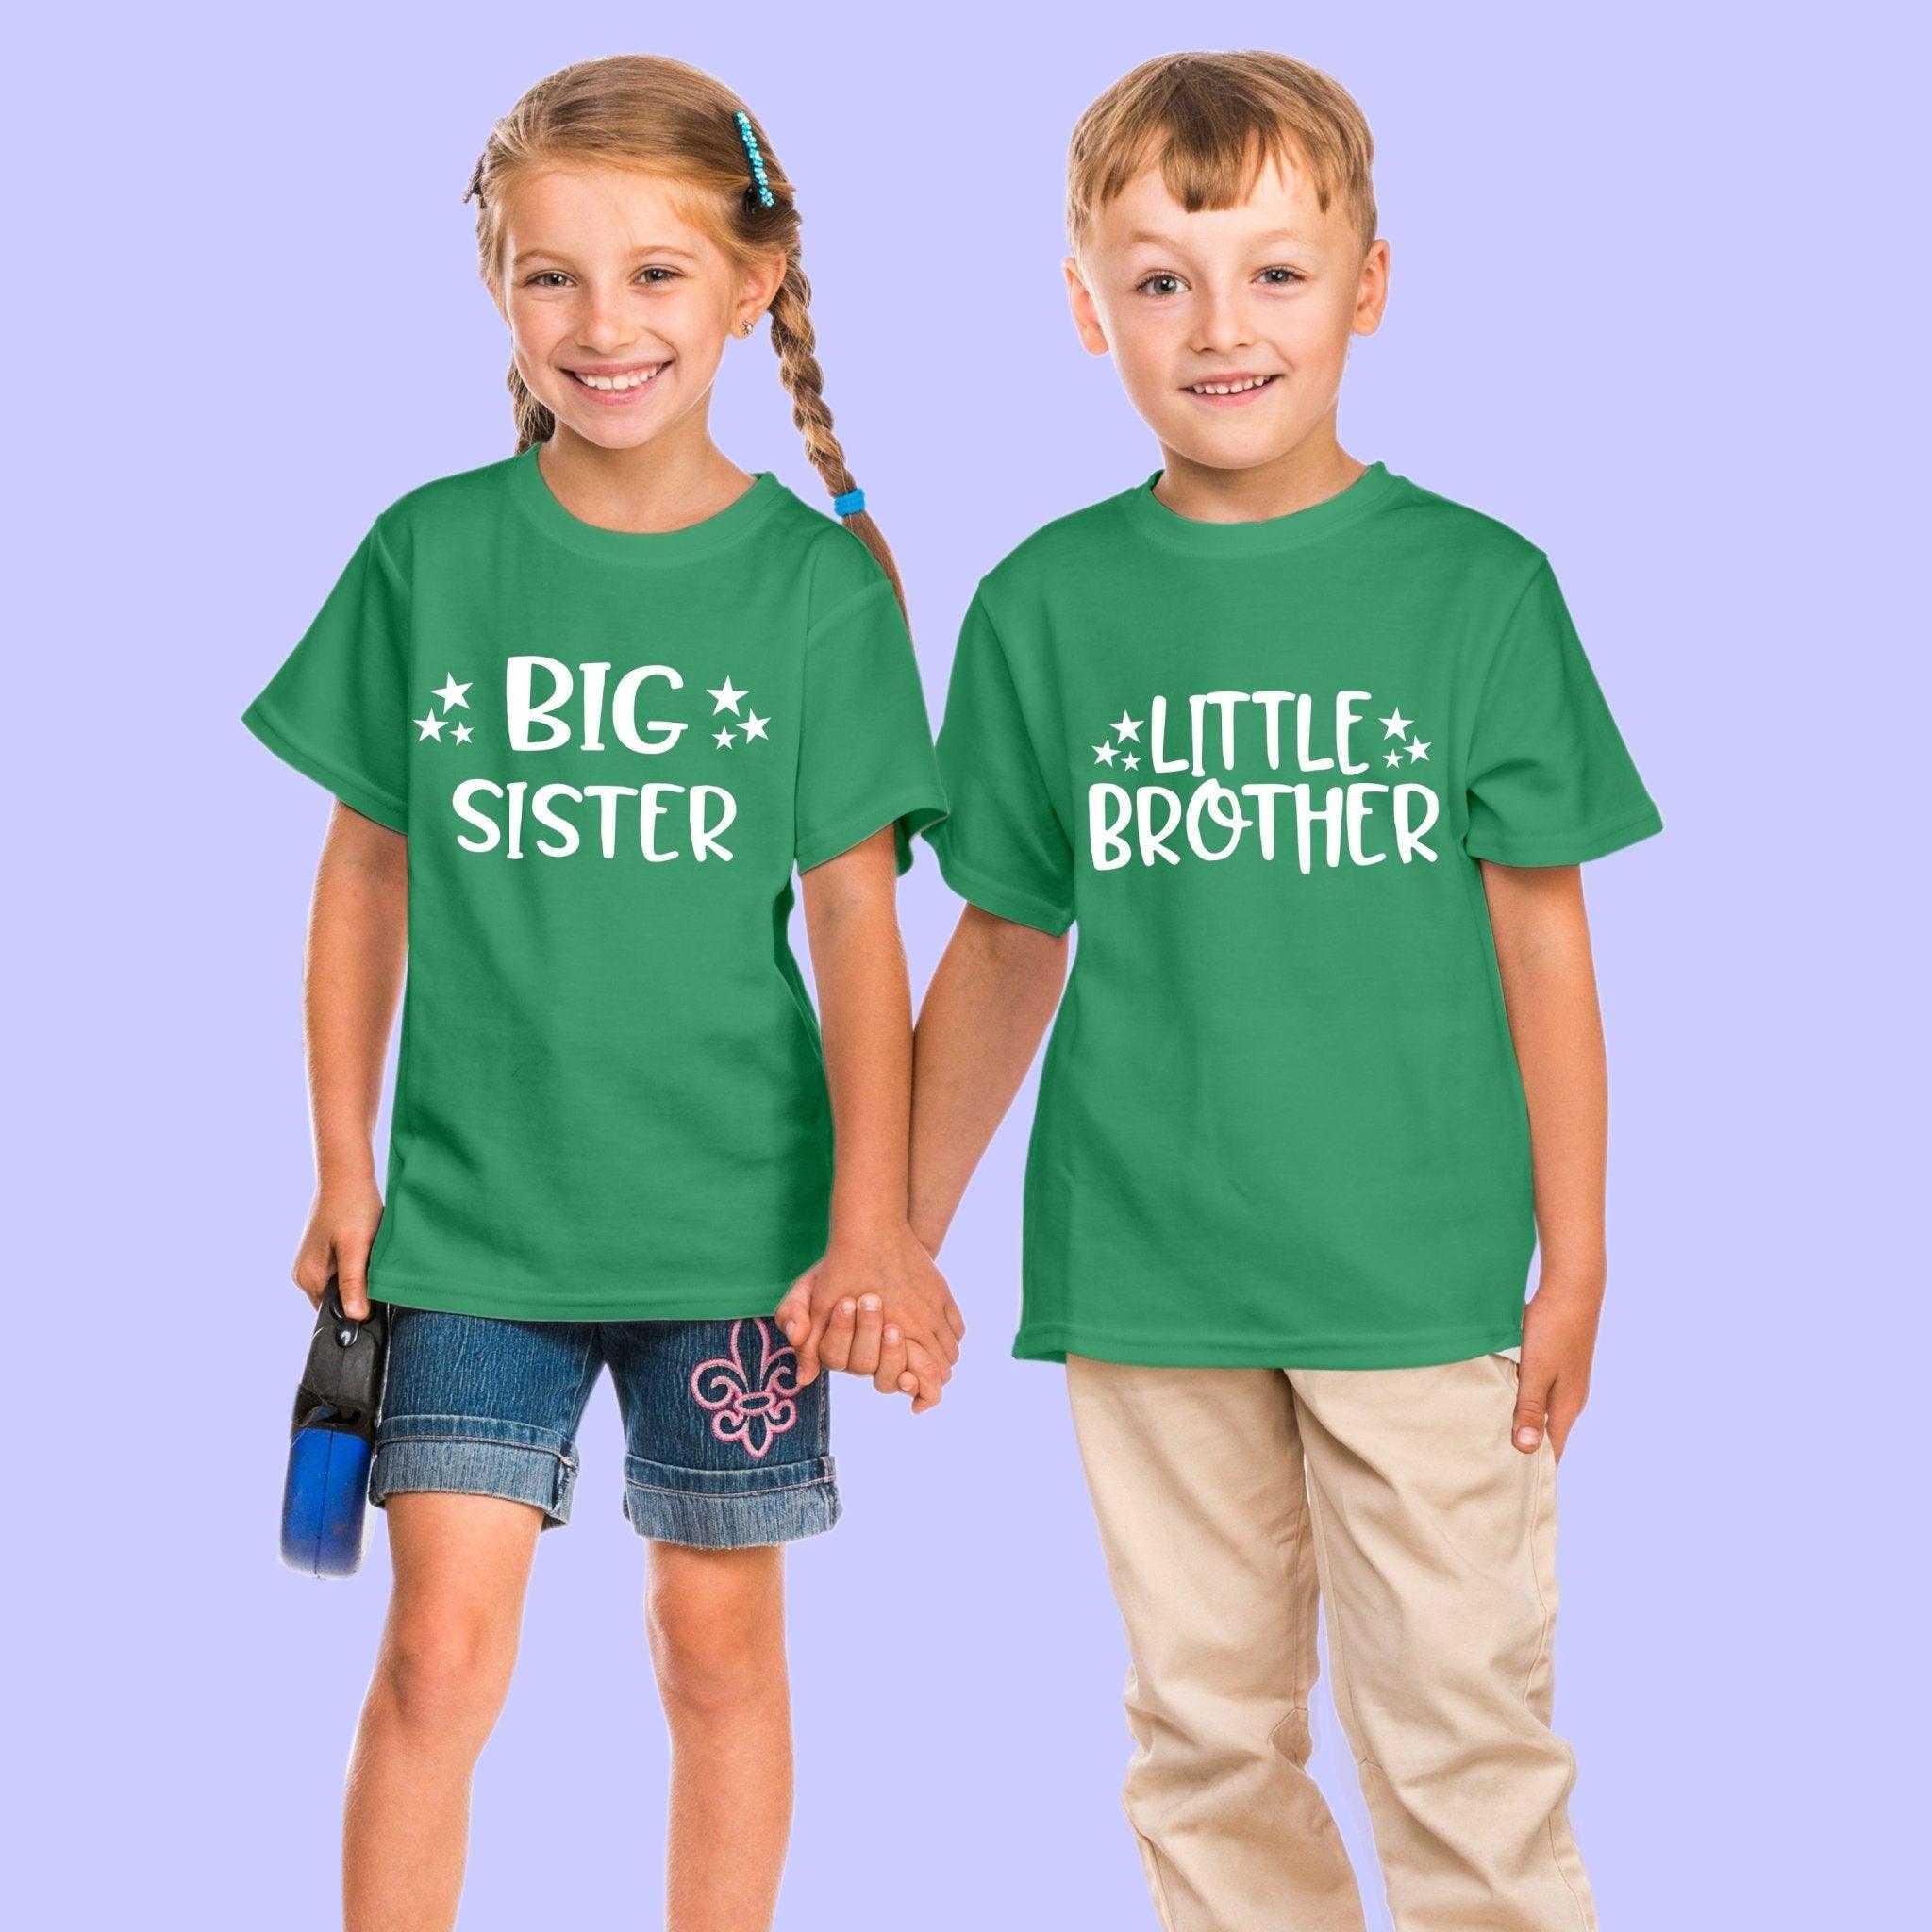 Sibling T Shirt for Kids Brother and Sister in Green Colour - Big Sister Little Brother Variant